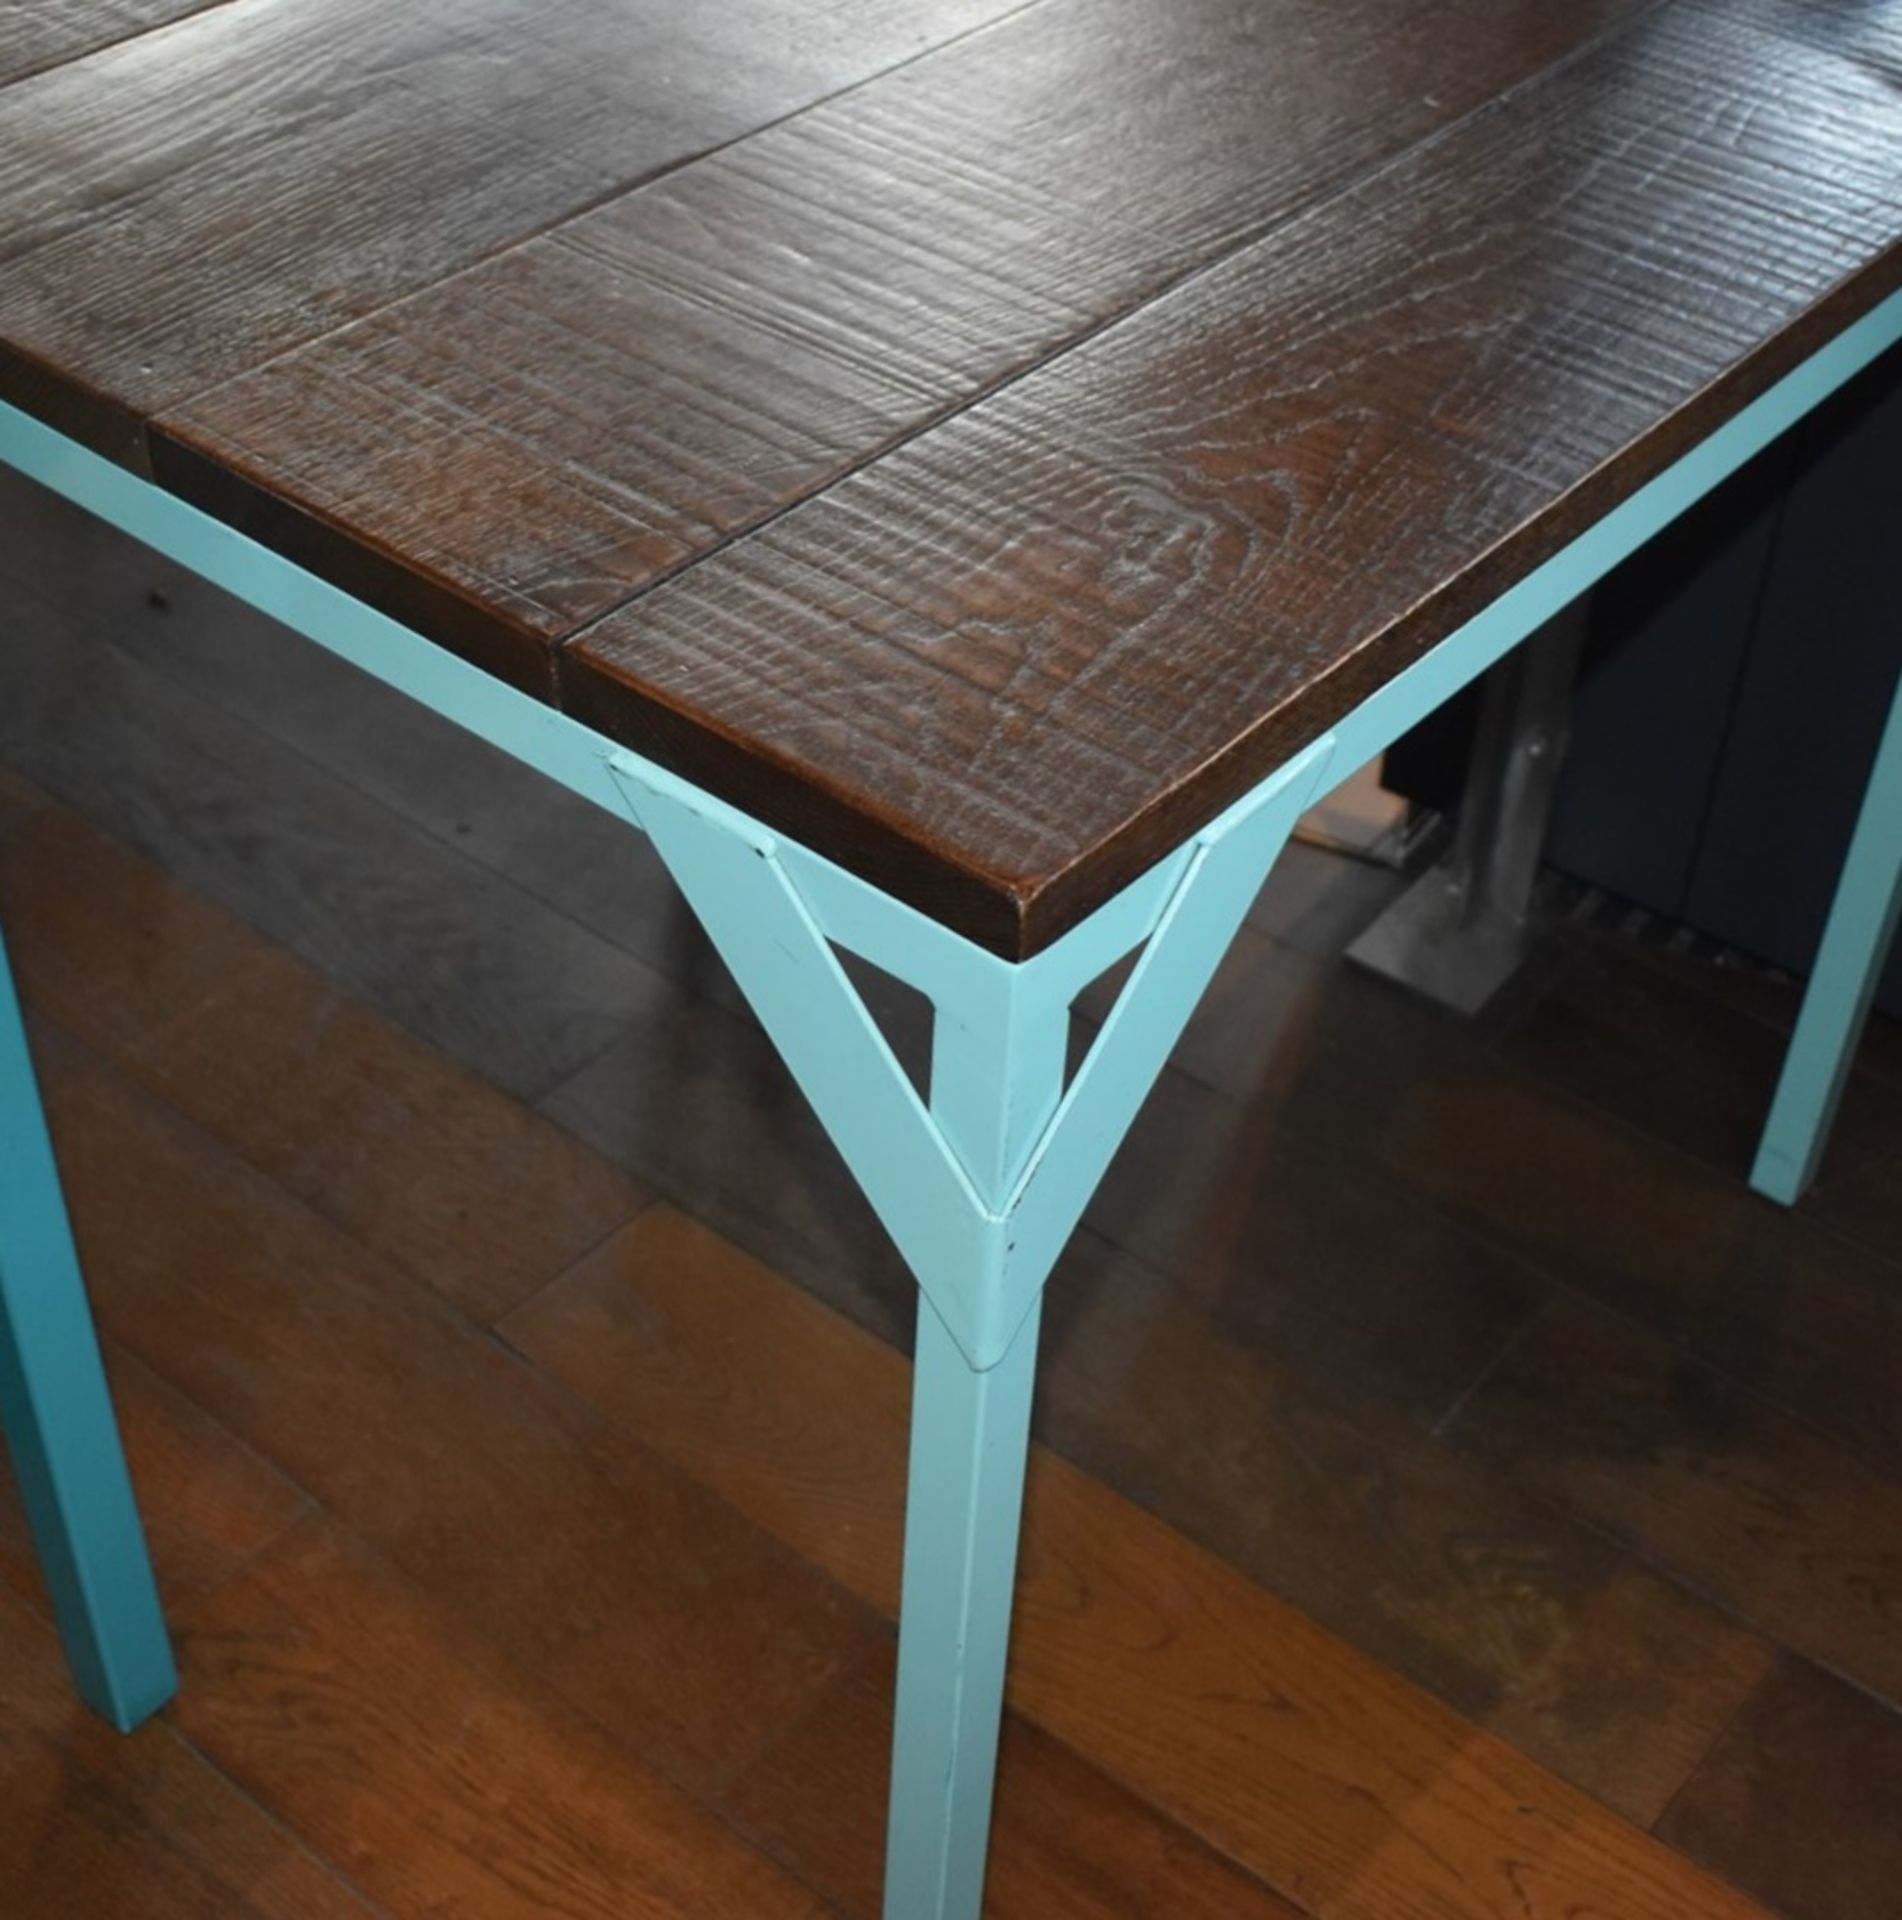 5 x Restaurant Dining Tables With Duck Egg Blue Steel Bases and Wooden Panelled Tops - Size: H77 - Image 3 of 4